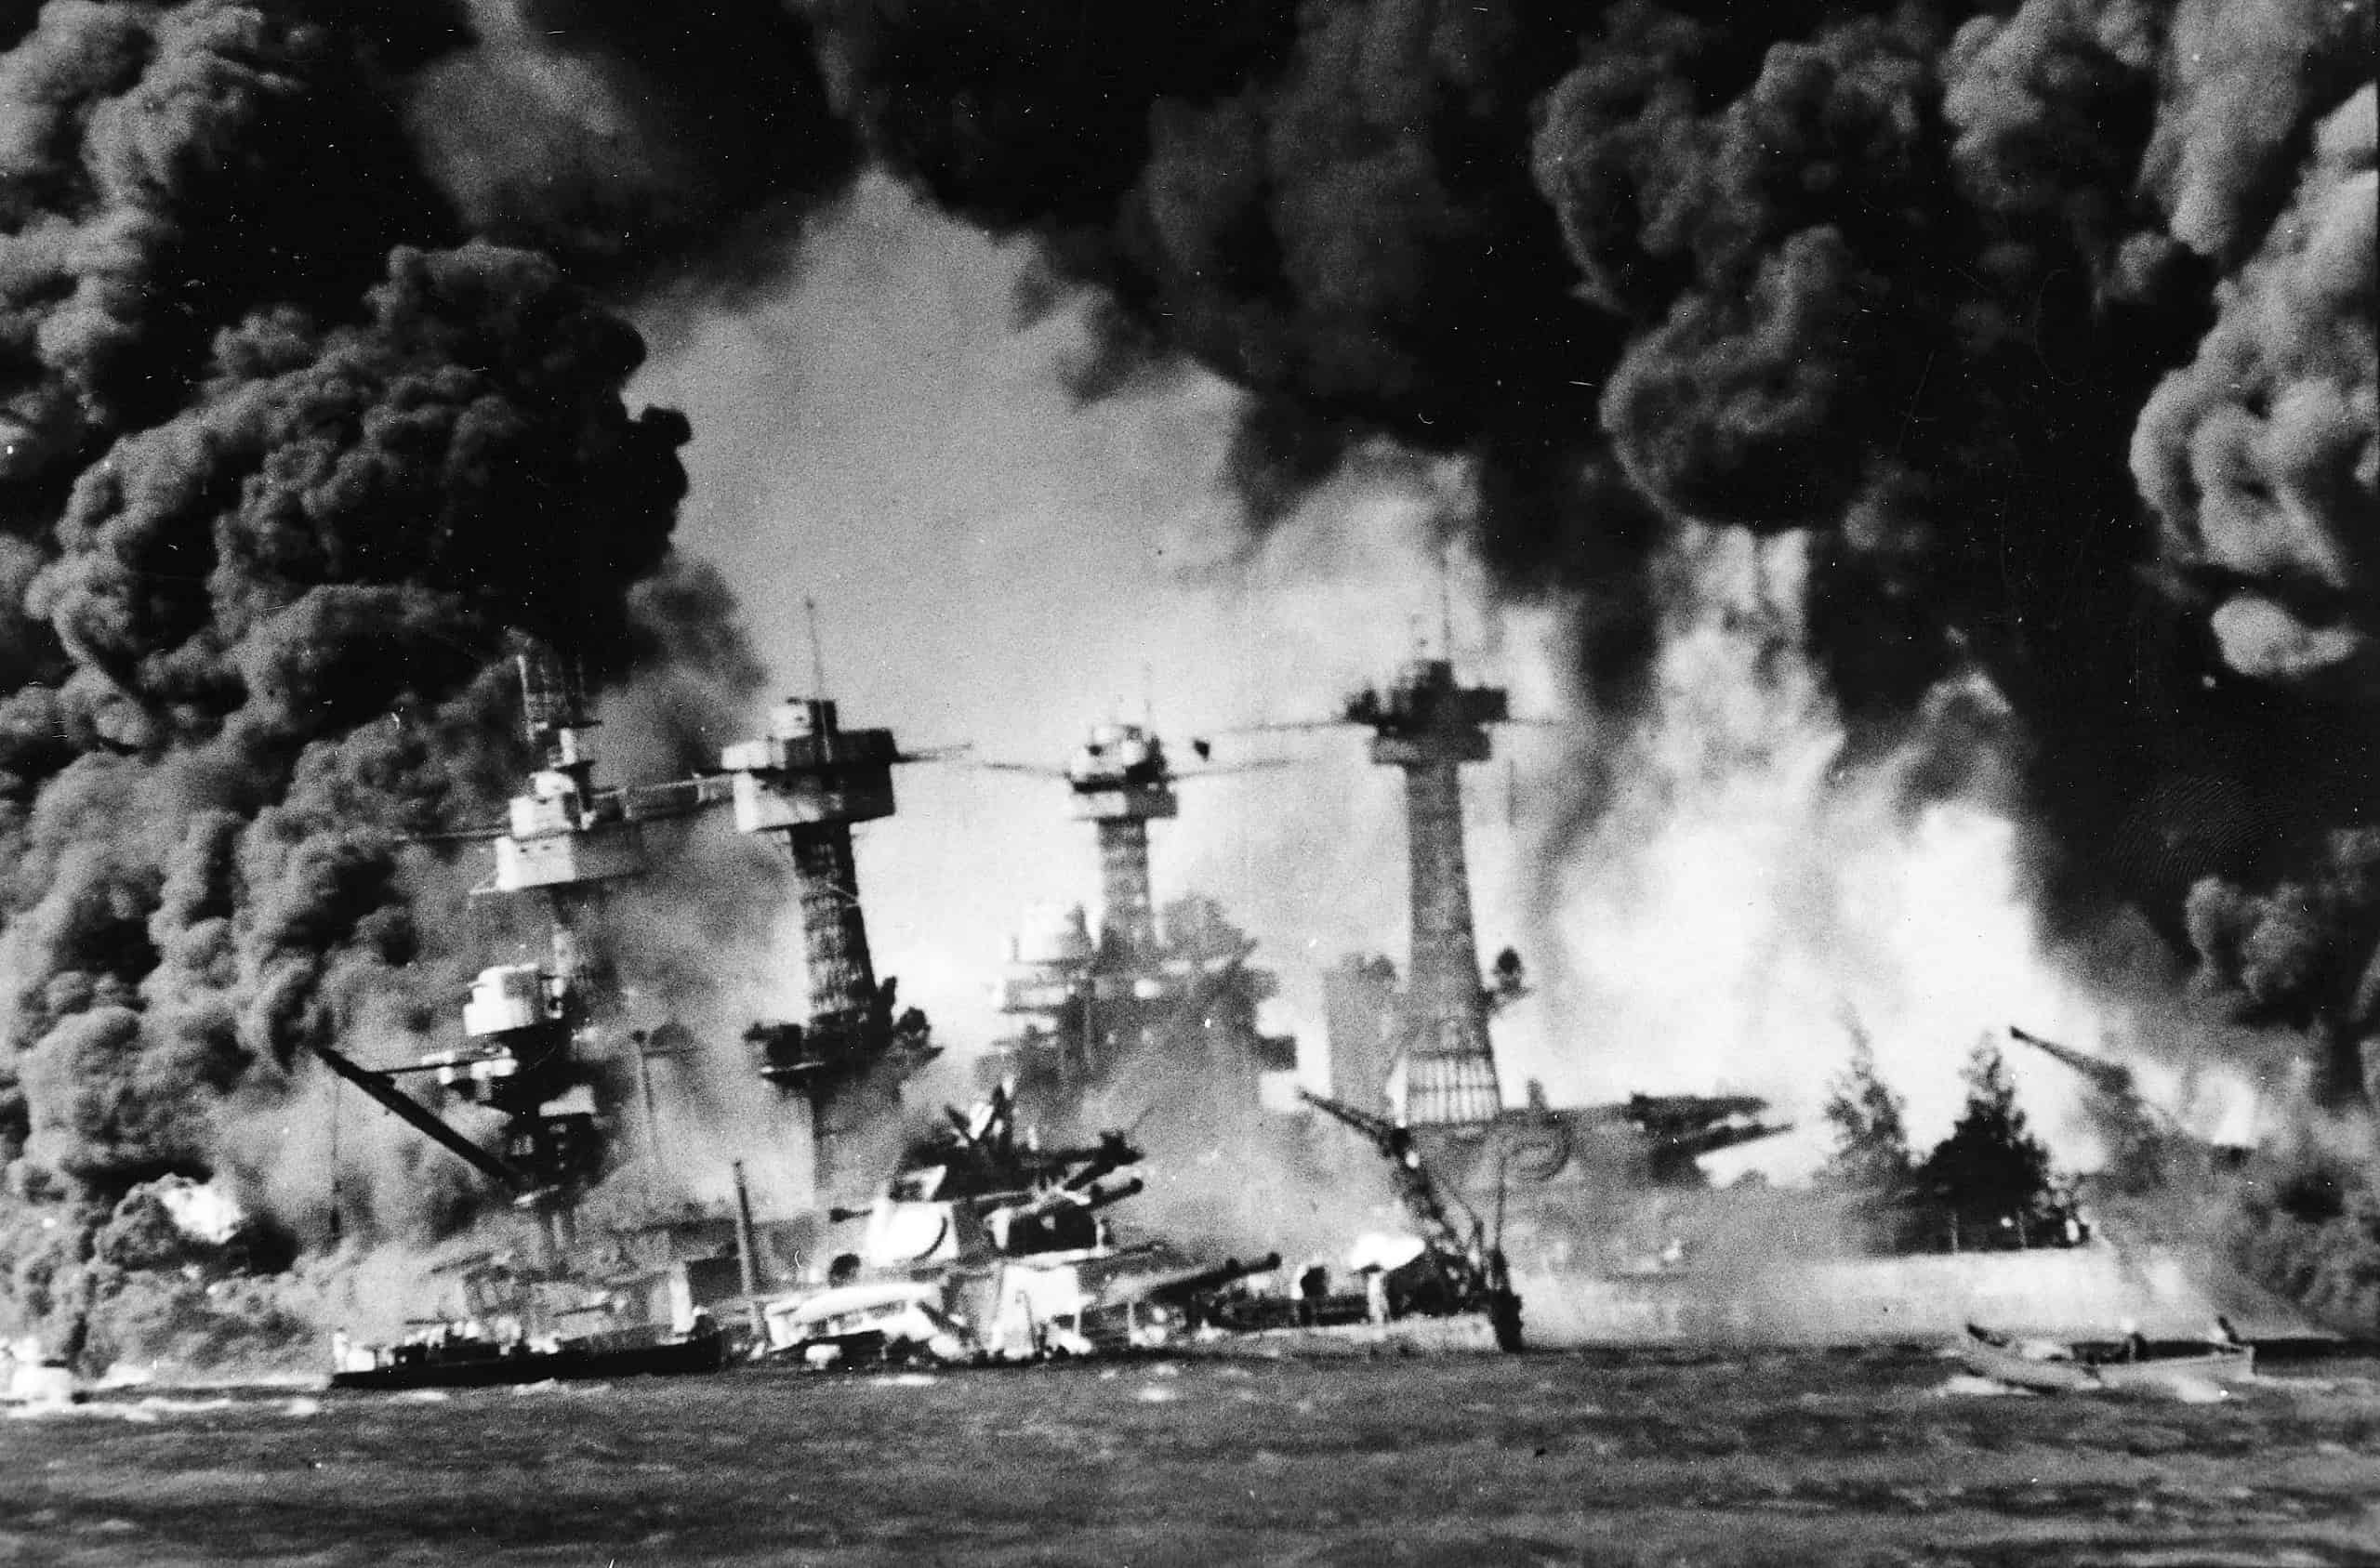 New World War II Photo 6 Sizes! Ships Aflame during Pearl Harbor Attack 